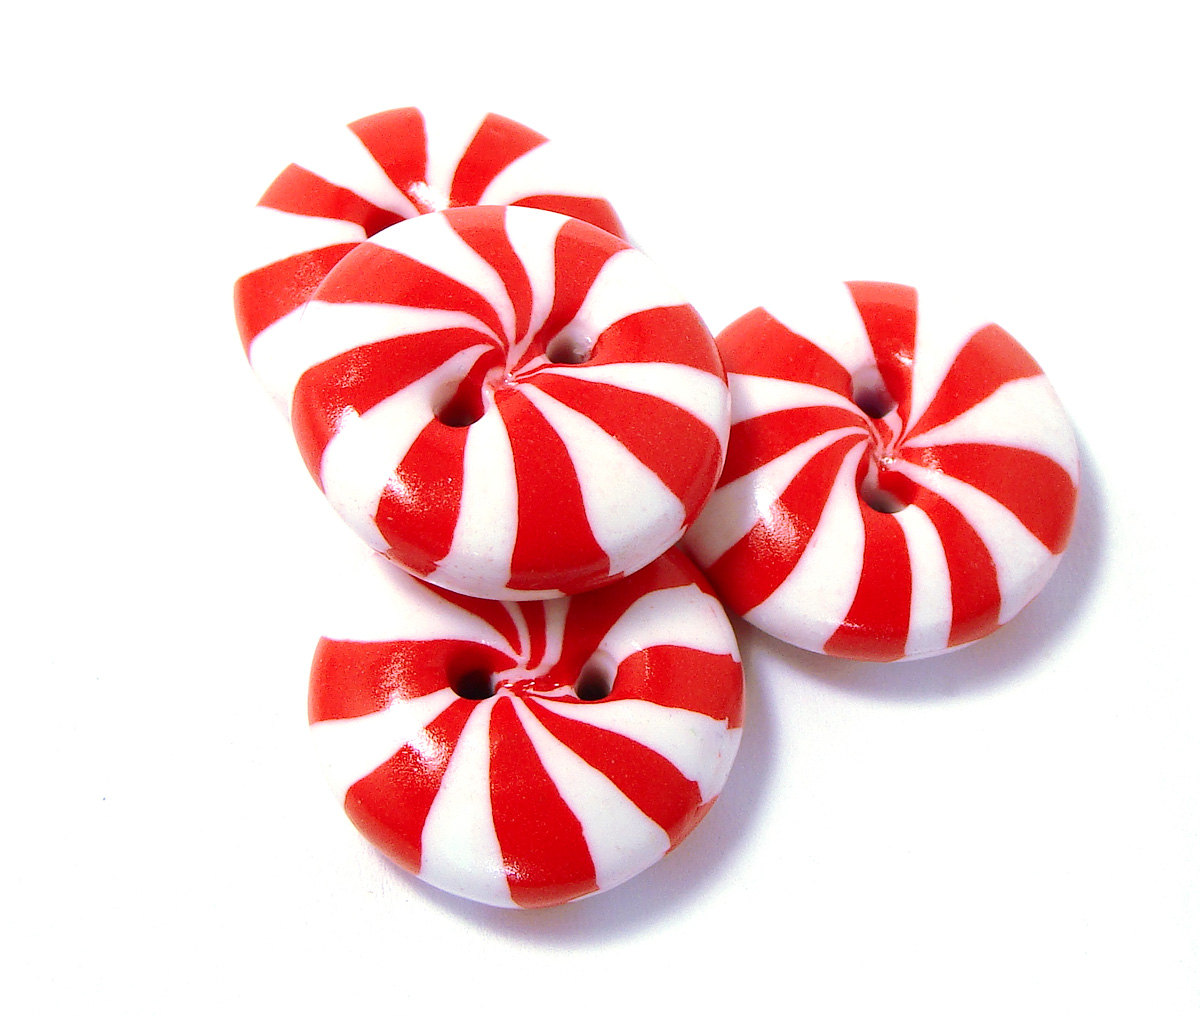 Popular items for peppermint candy 